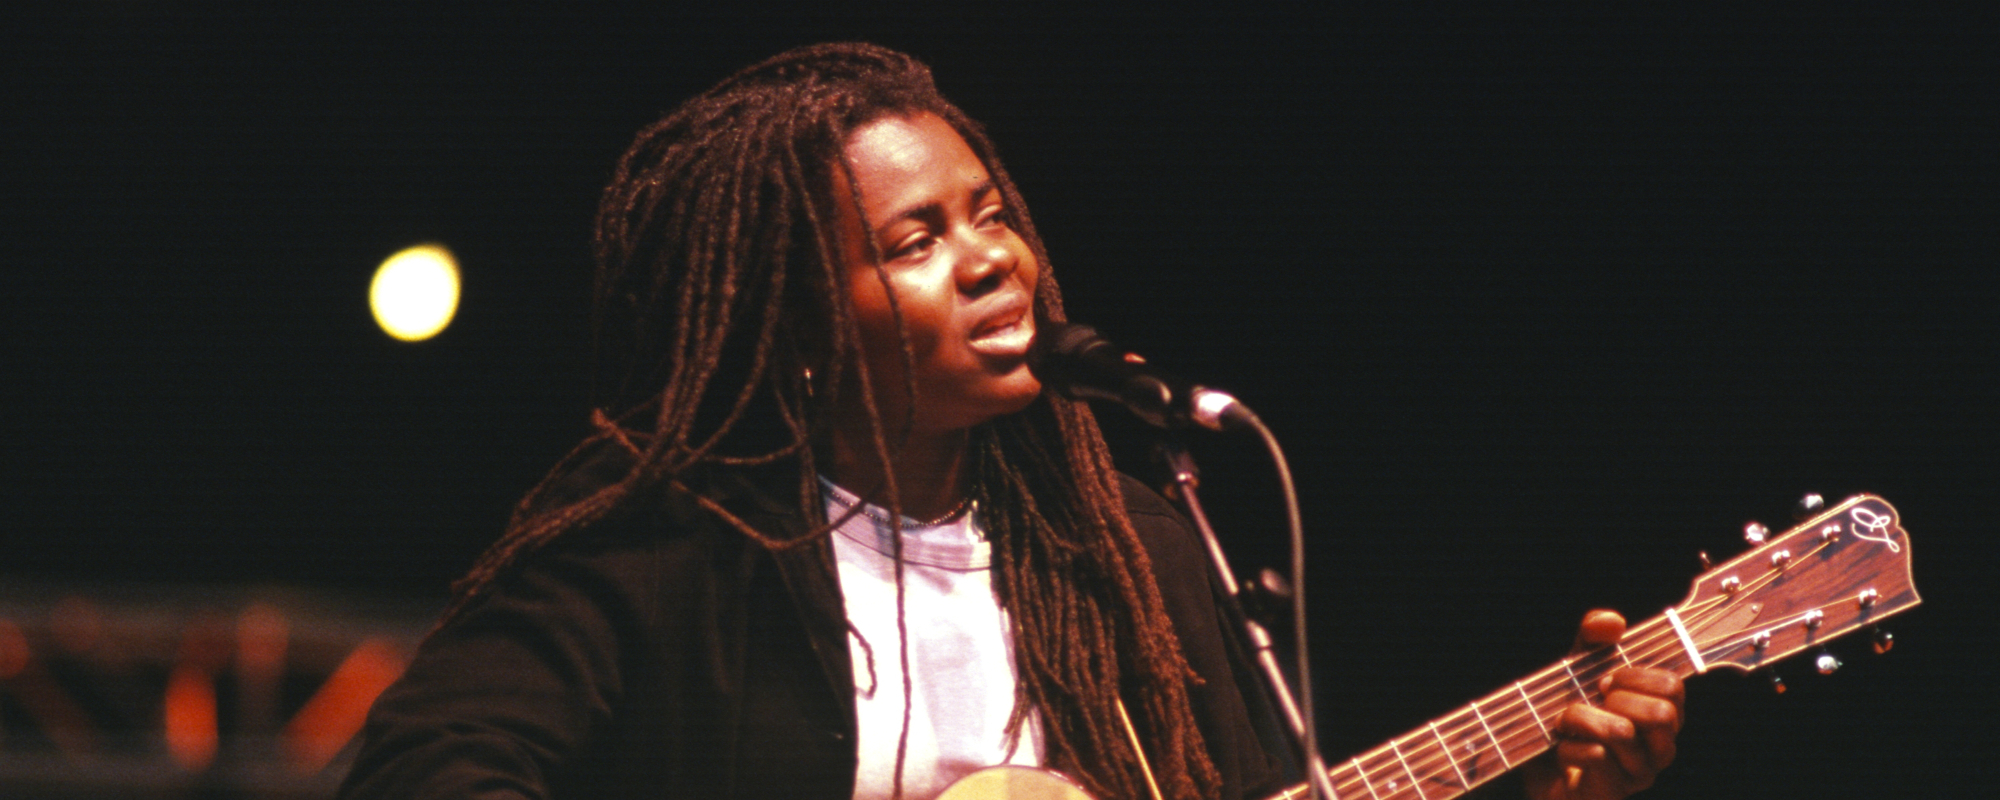 AI Reimagines Tracy Chapman’s 1988 Hit “Fast Car” As a Rock Song